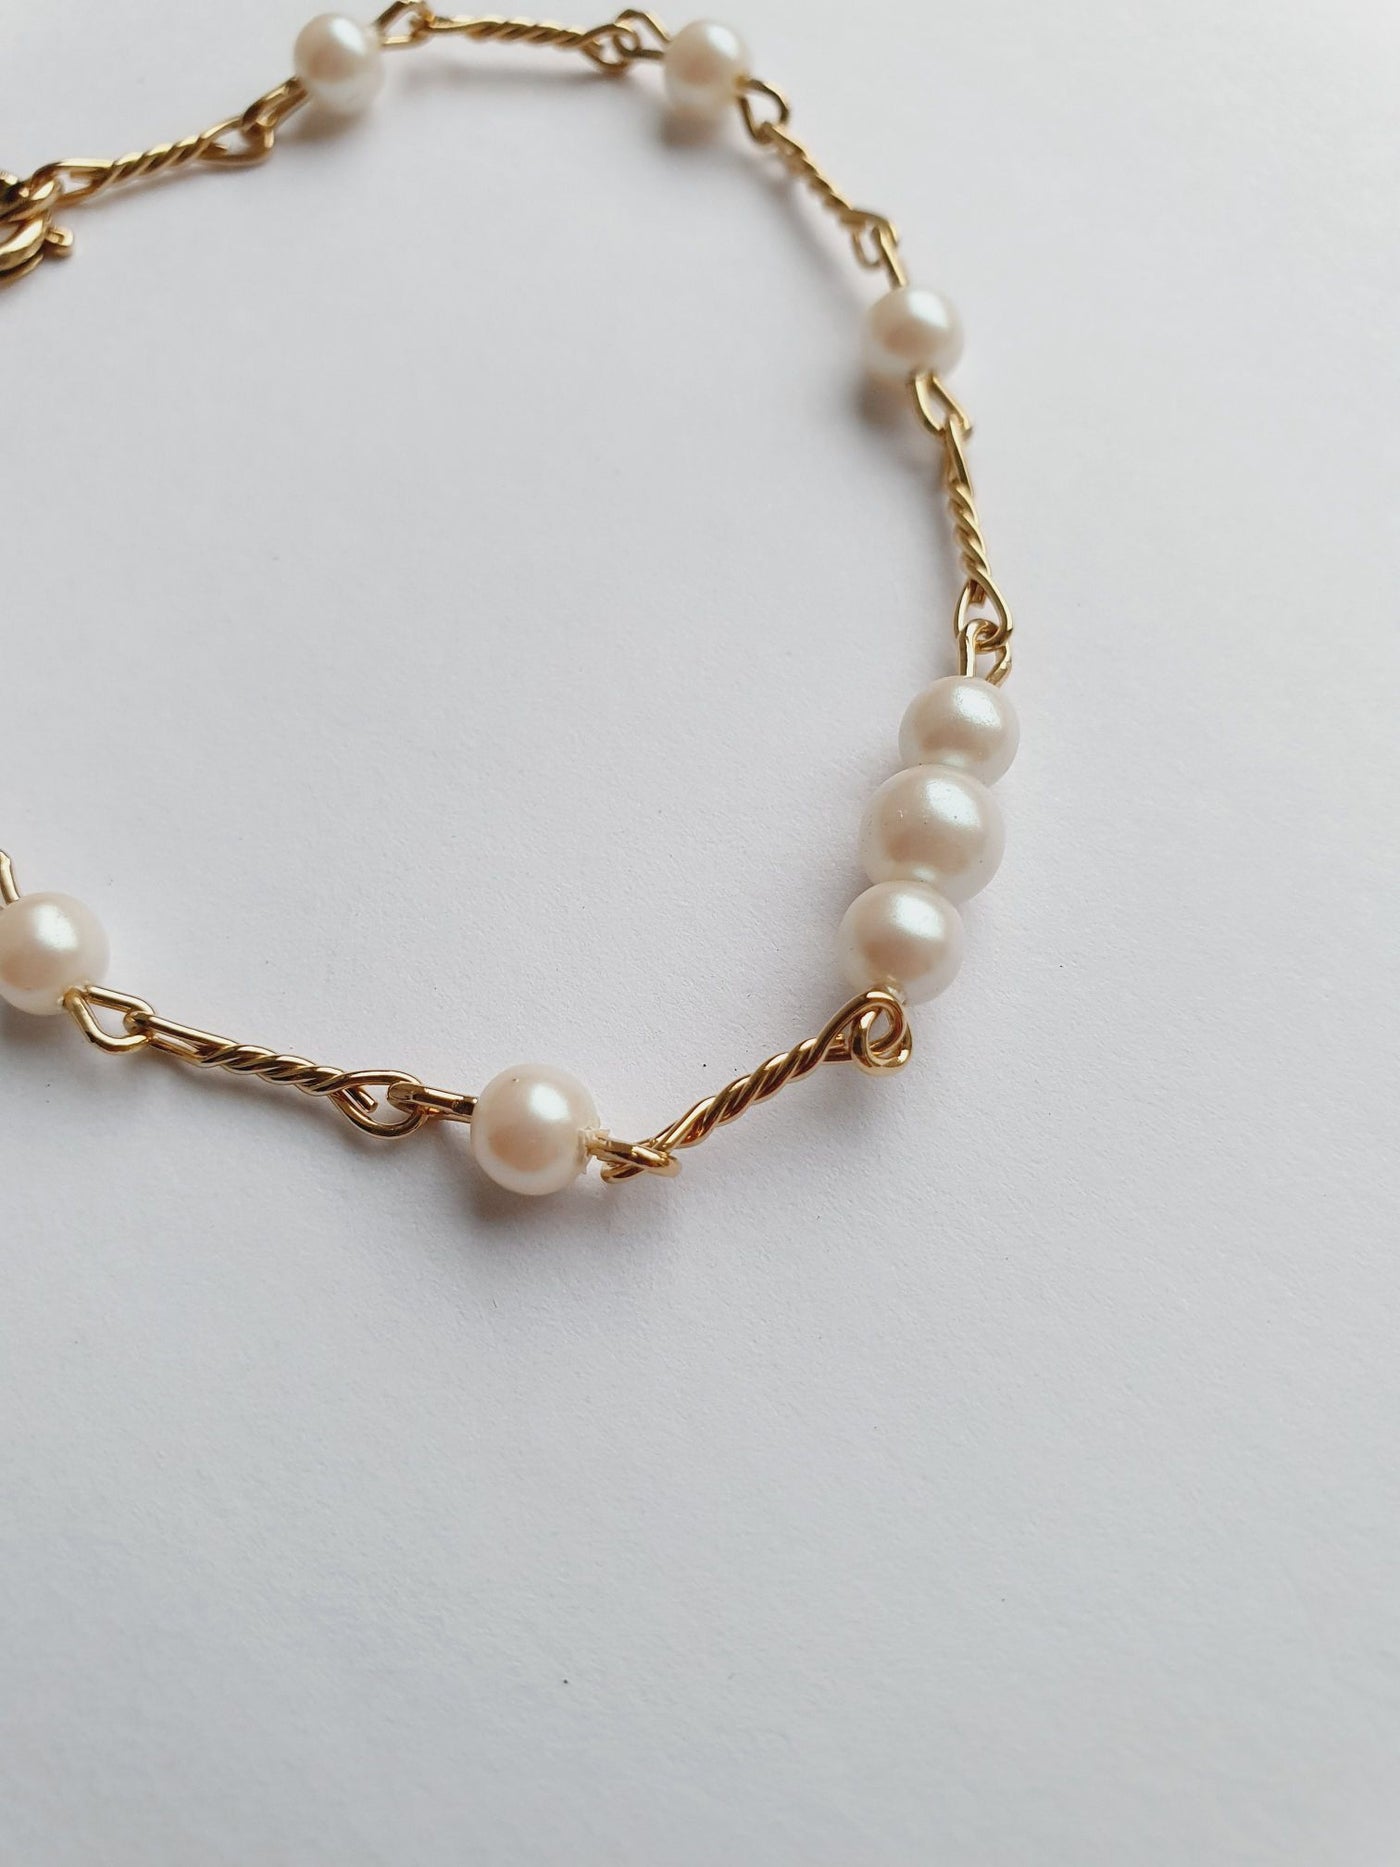 Vintage Gold Plated Twist Bar Chain Bracelet with Pearls